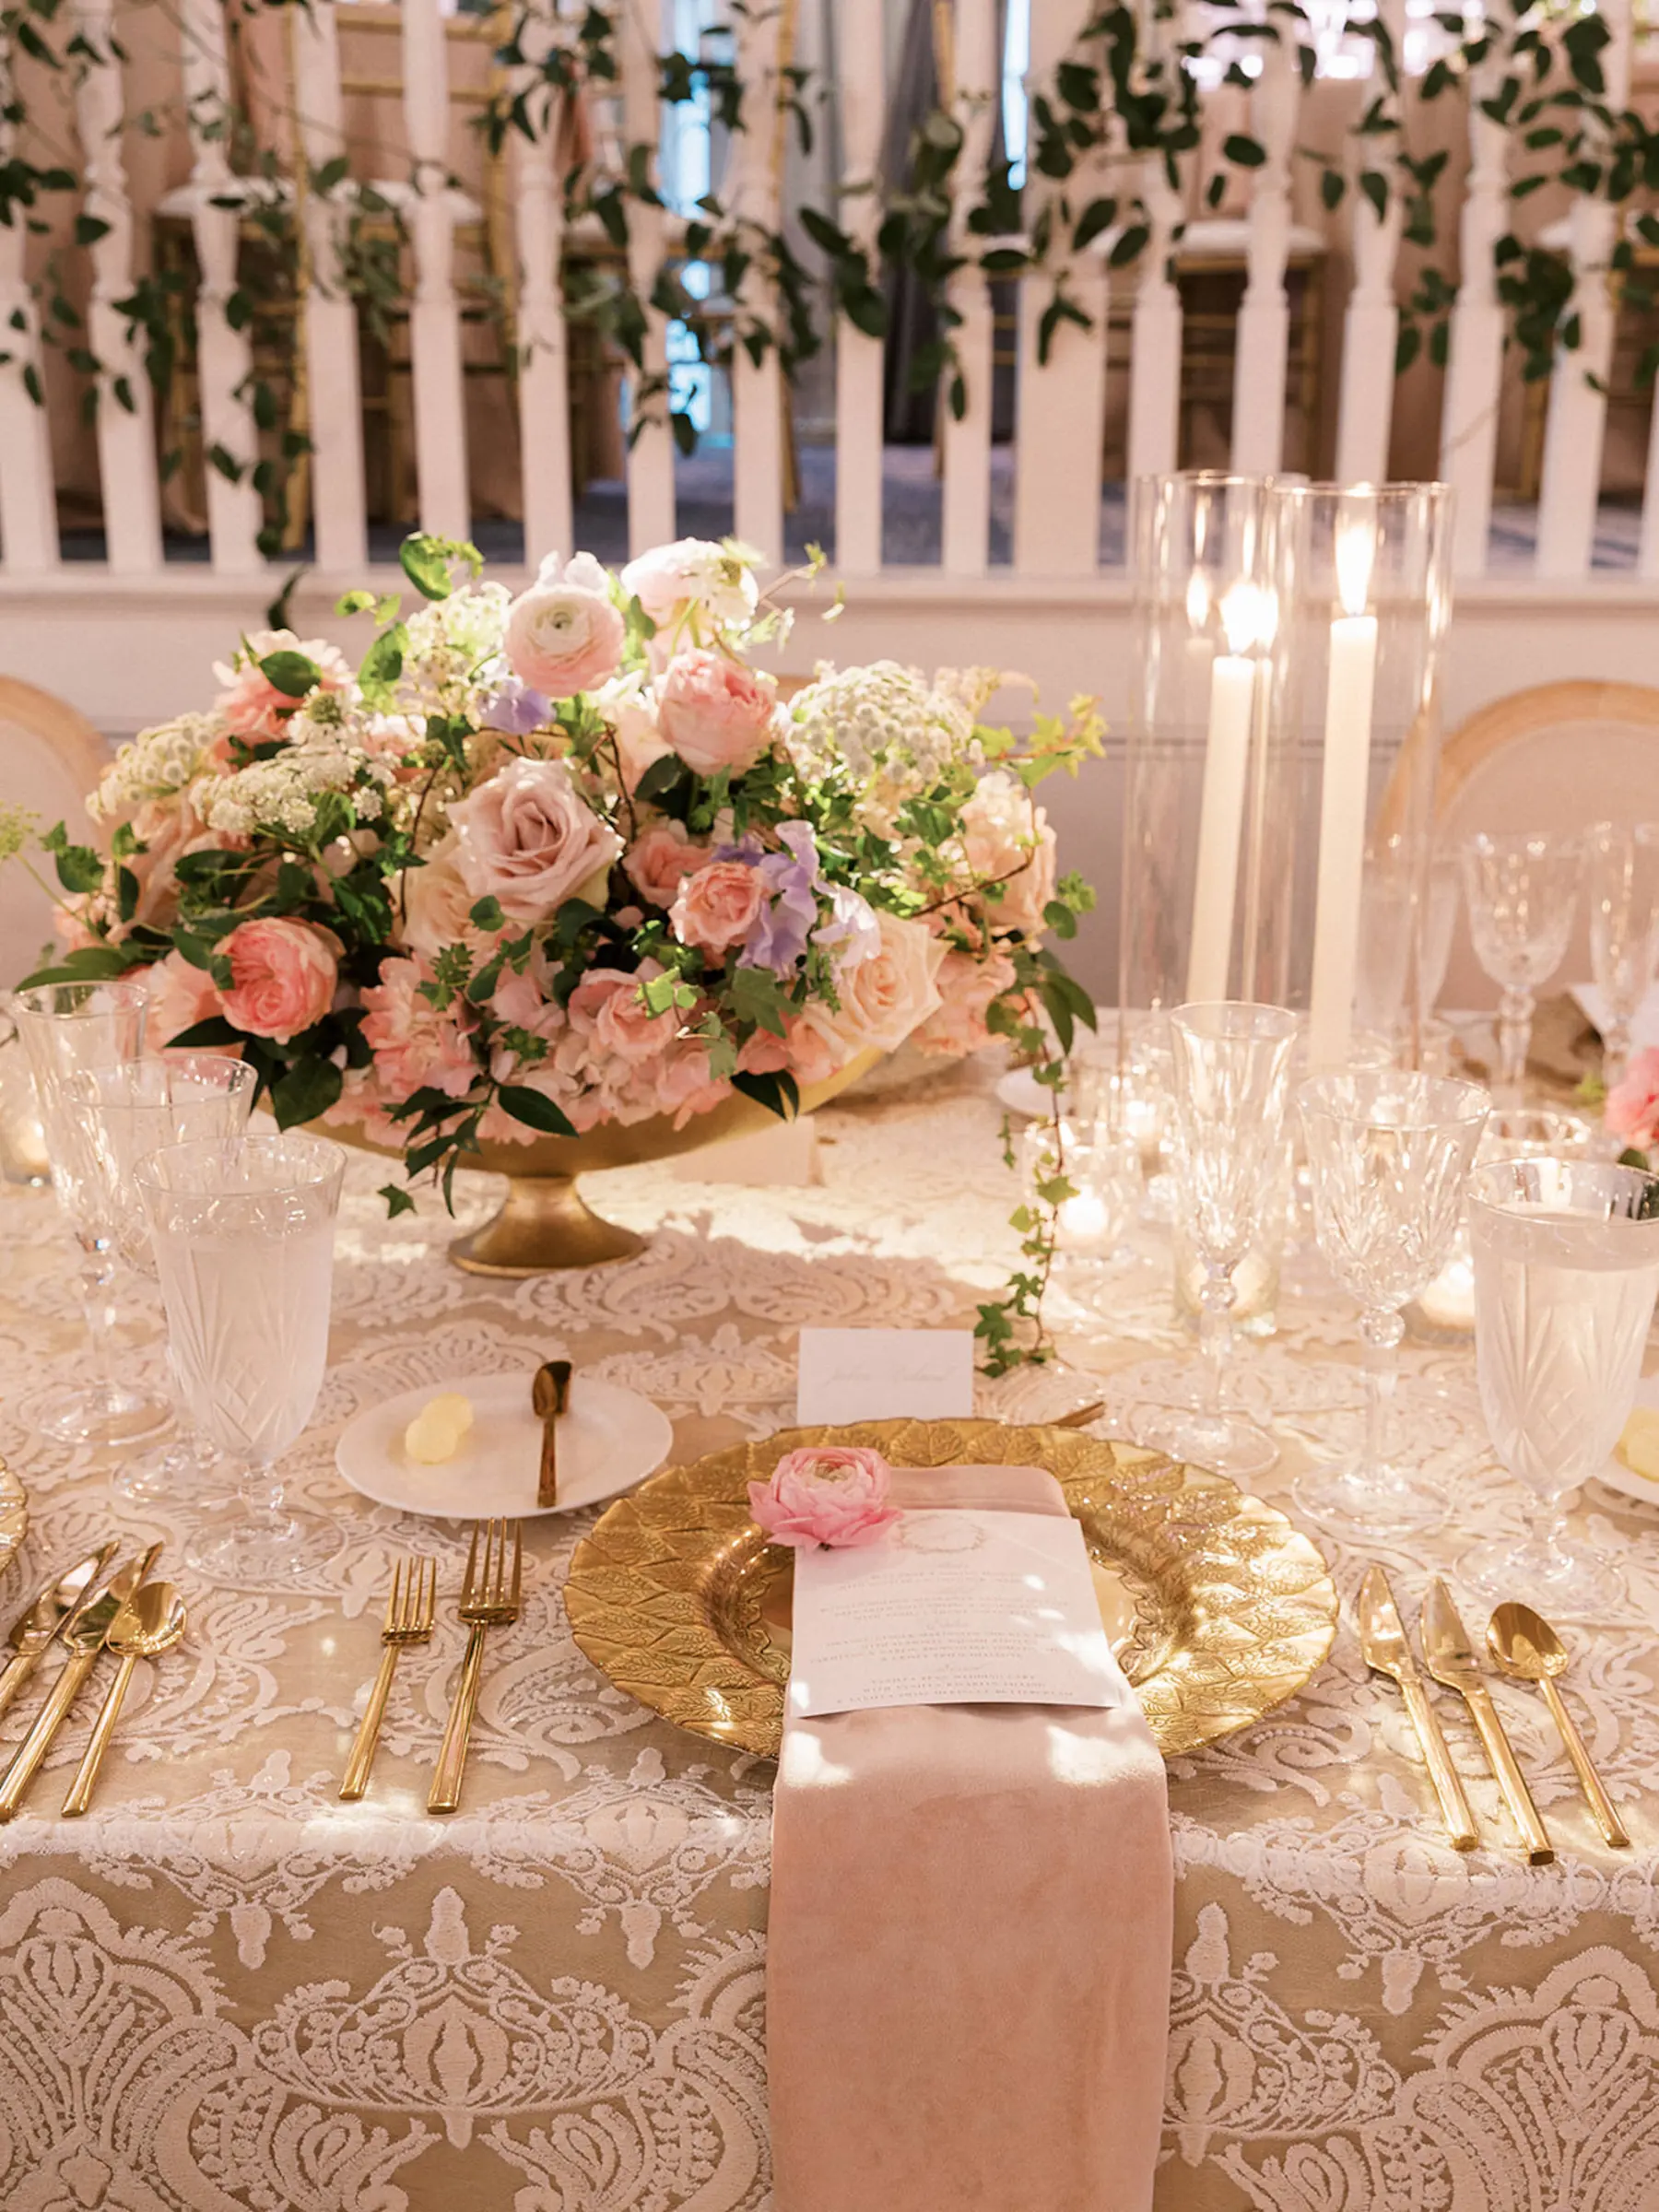 Neutral Pink, White, and Gold Garden Inspired Wedding Reception Place Setting Ideas | Whimsical Pink Rose, Anemone, Purple and White Flower Centerpiece Inspiration | Tampa Bay Planner Unique Weddings and Events